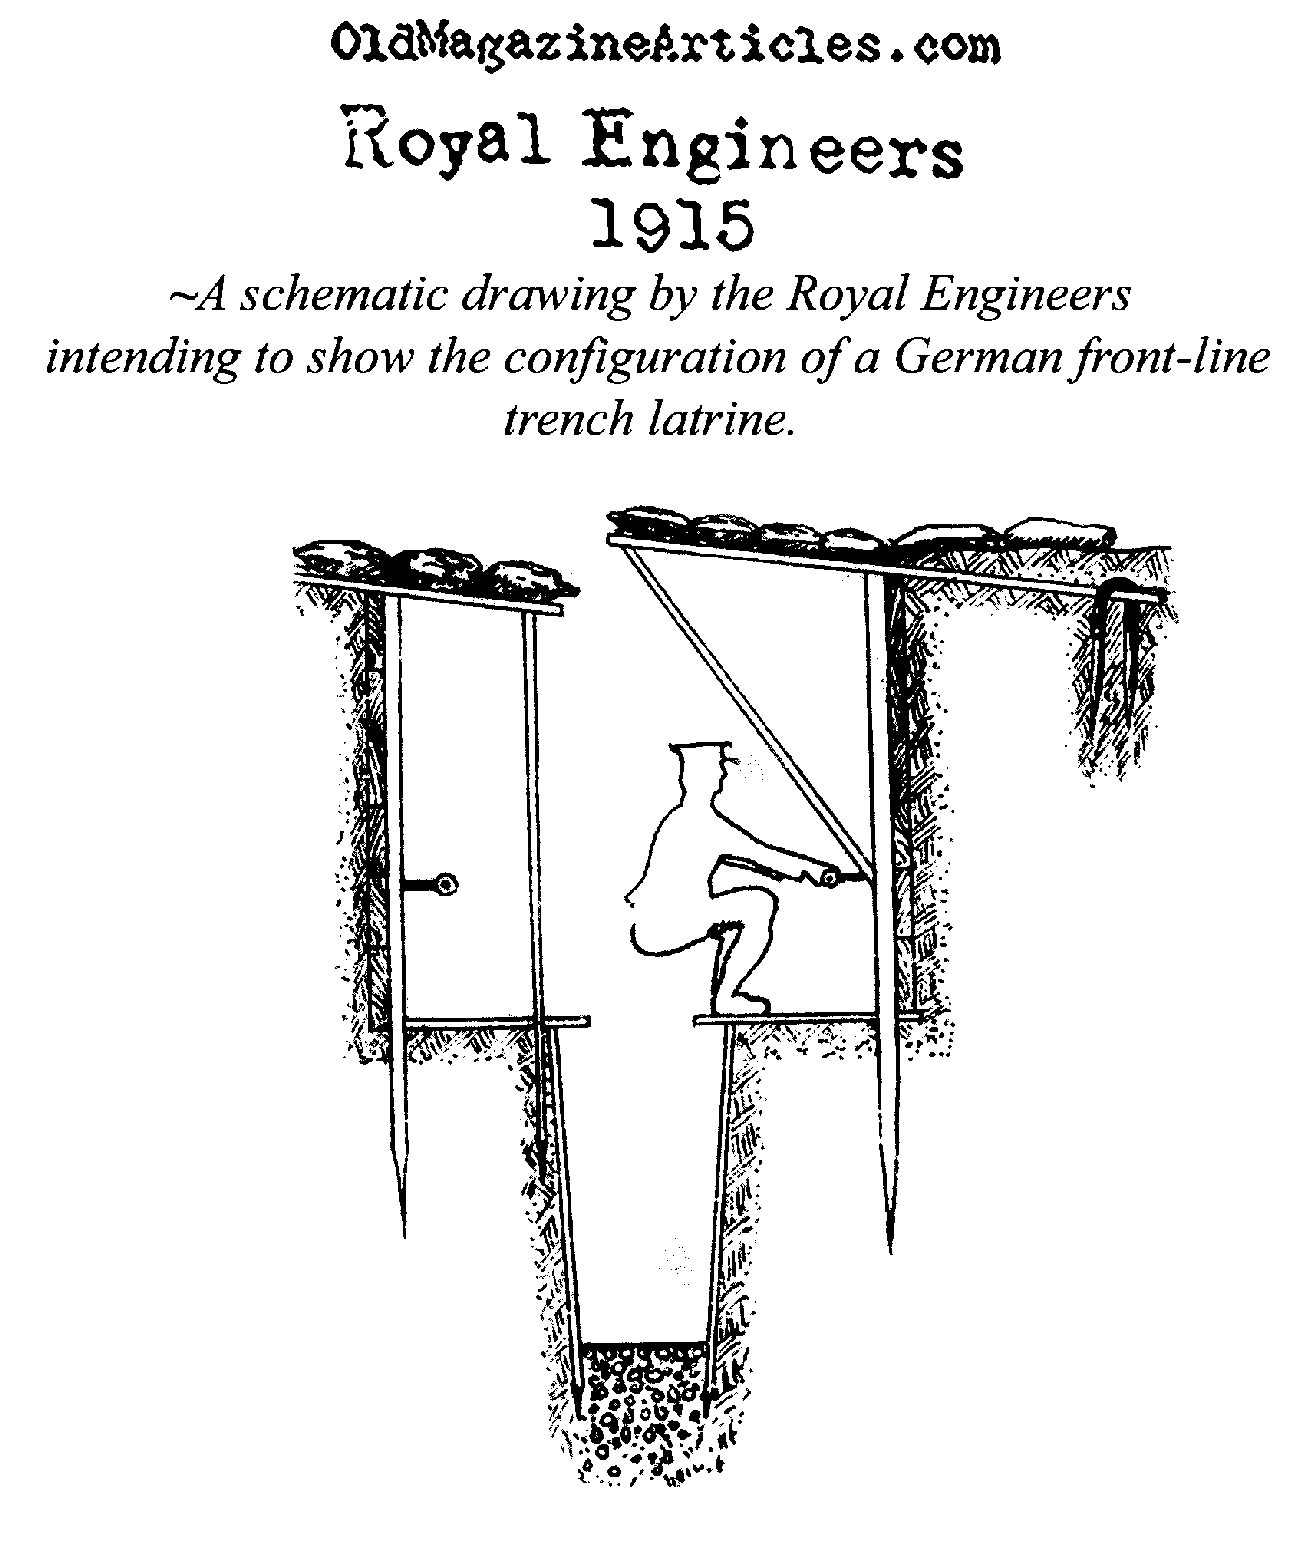 A British Drawing of a German Trench Latrine (Royal Engineers, 1915)